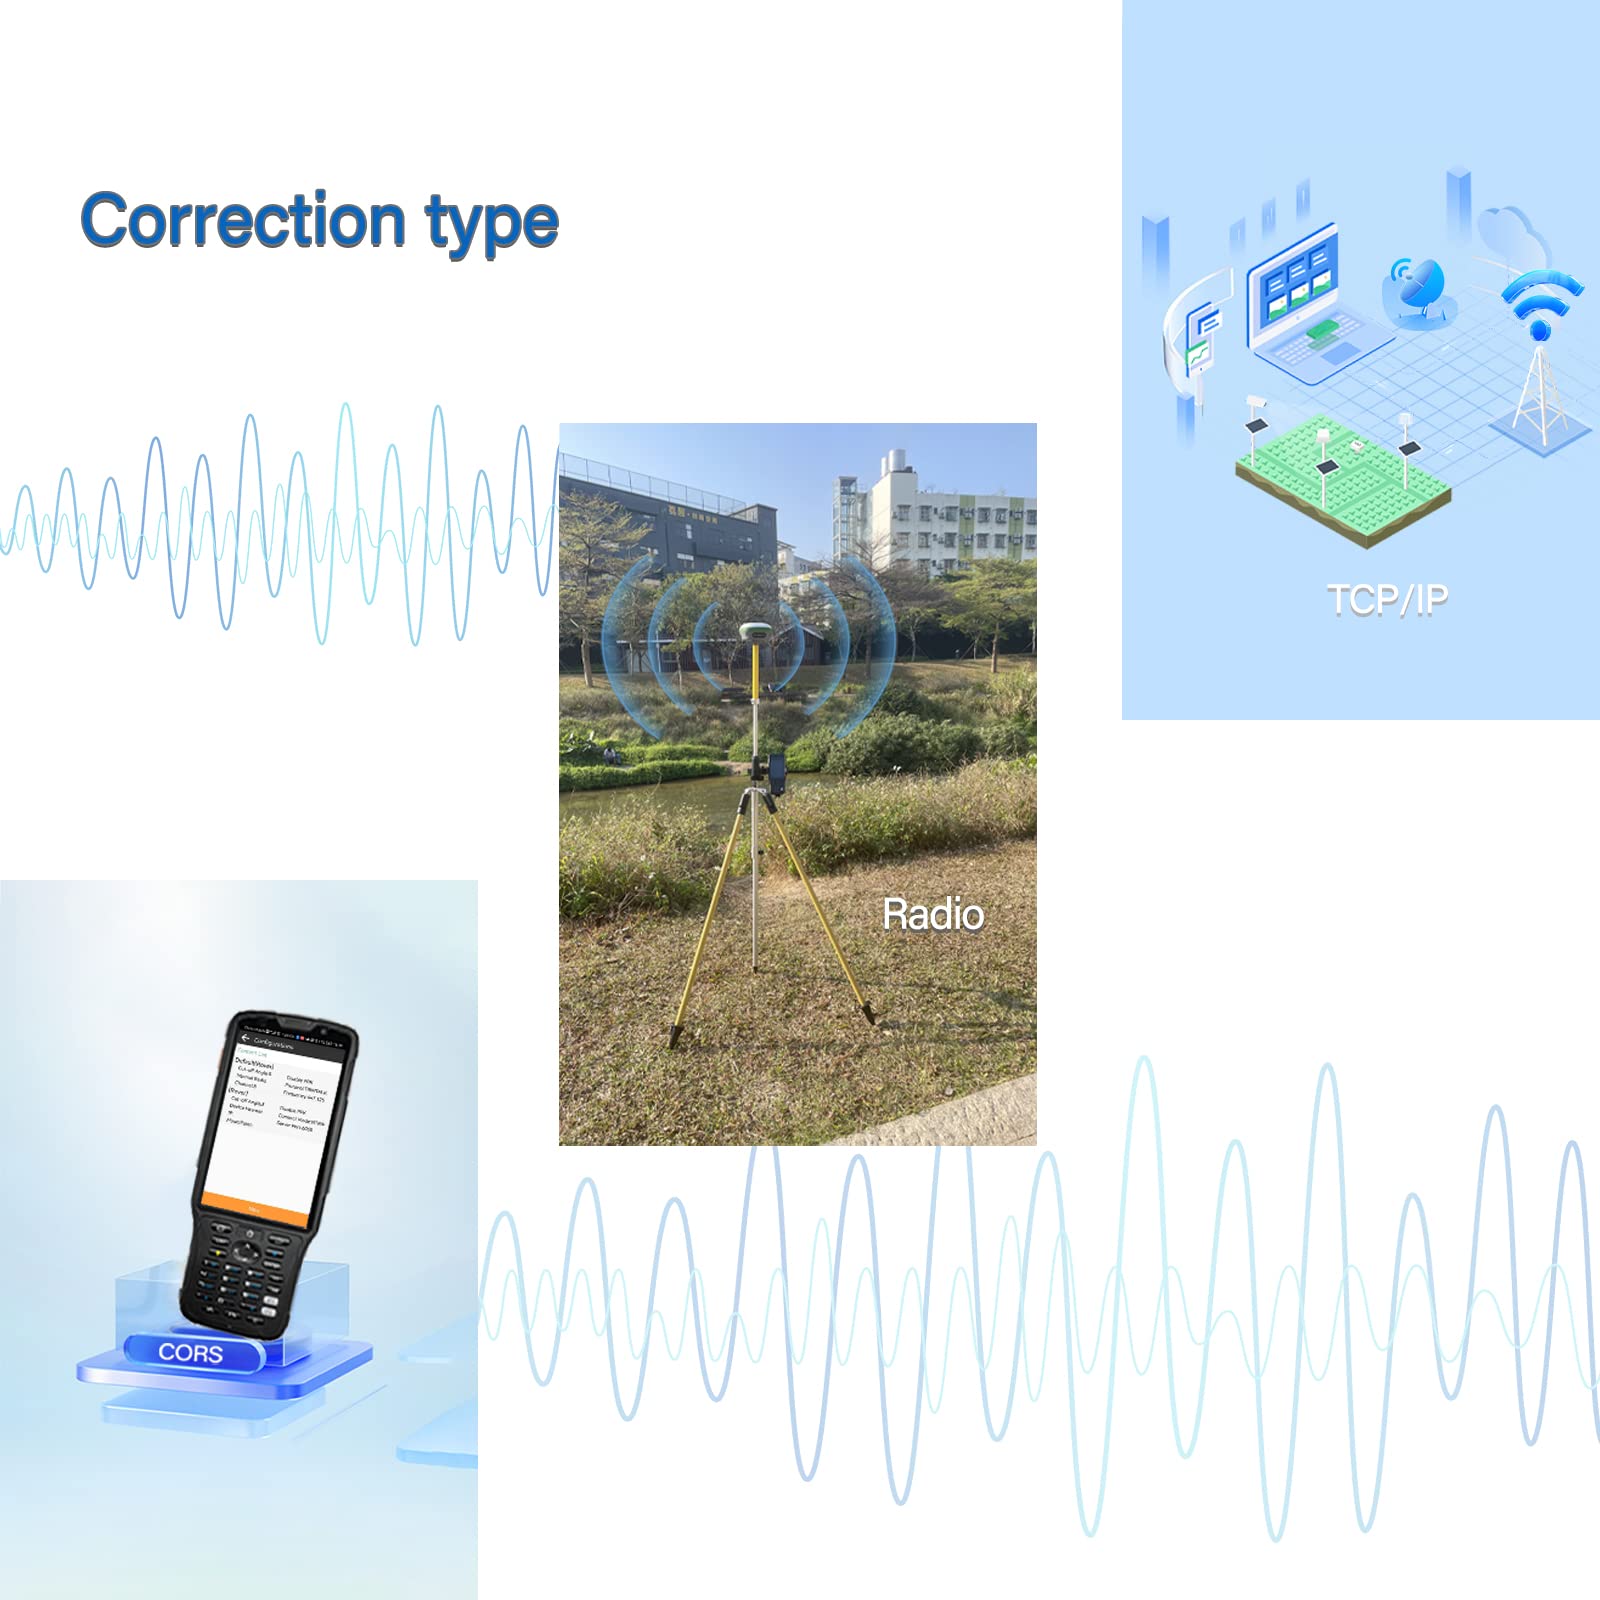 SMAJAYU R26 V1 IMU RTK GNSS Survey Equipment with Rover,Base and Handheld Collector Surveying Software Complete for Construction and Geodetic Surveying or Layout Planning Centimeter-Level Measurement